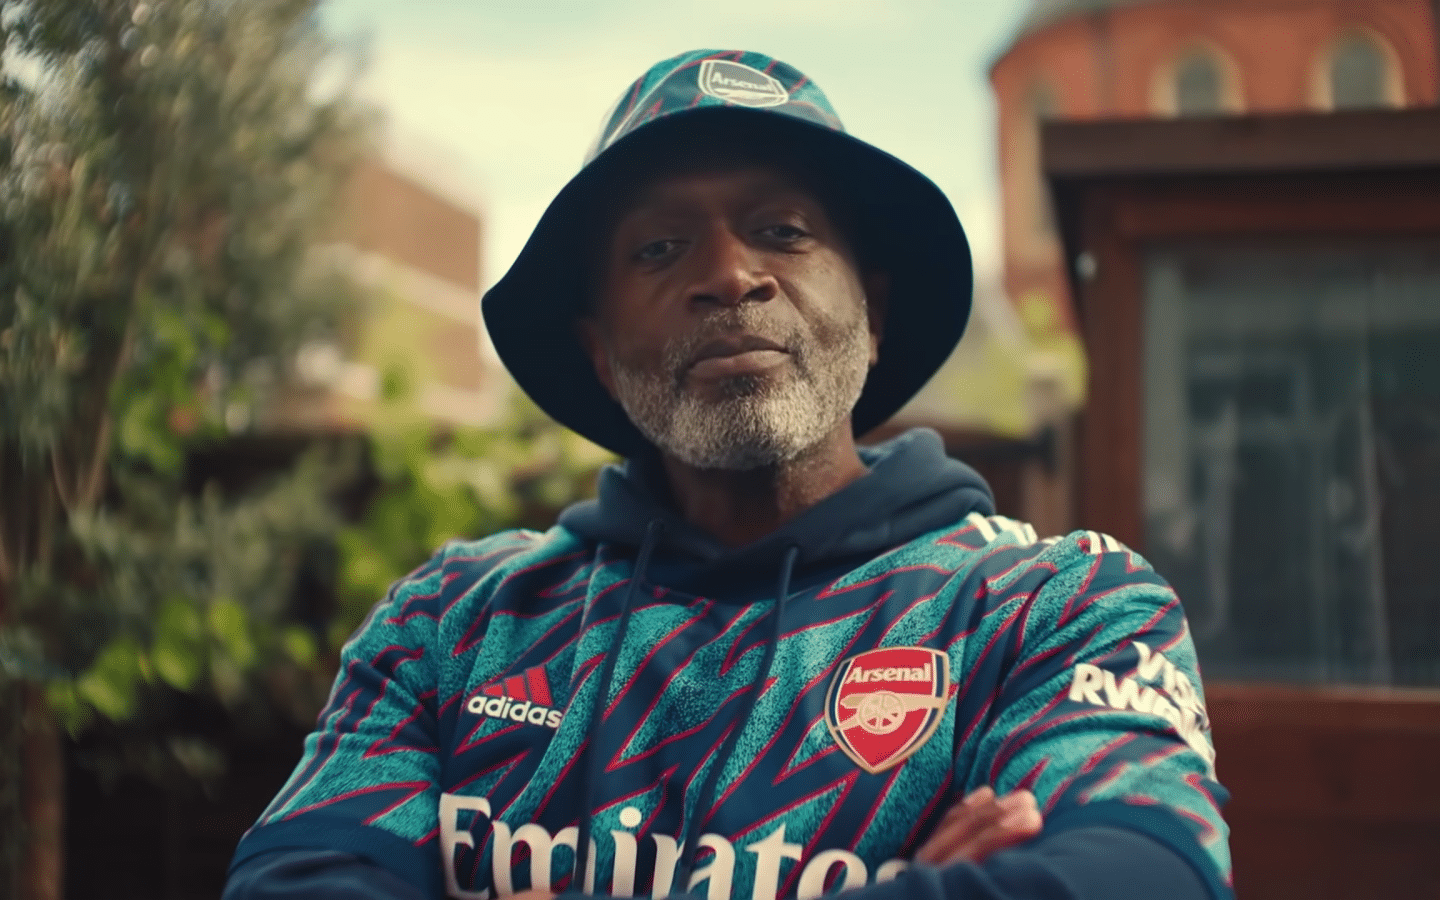 Man arms crossed with bucket hat and Arsenal FC kit